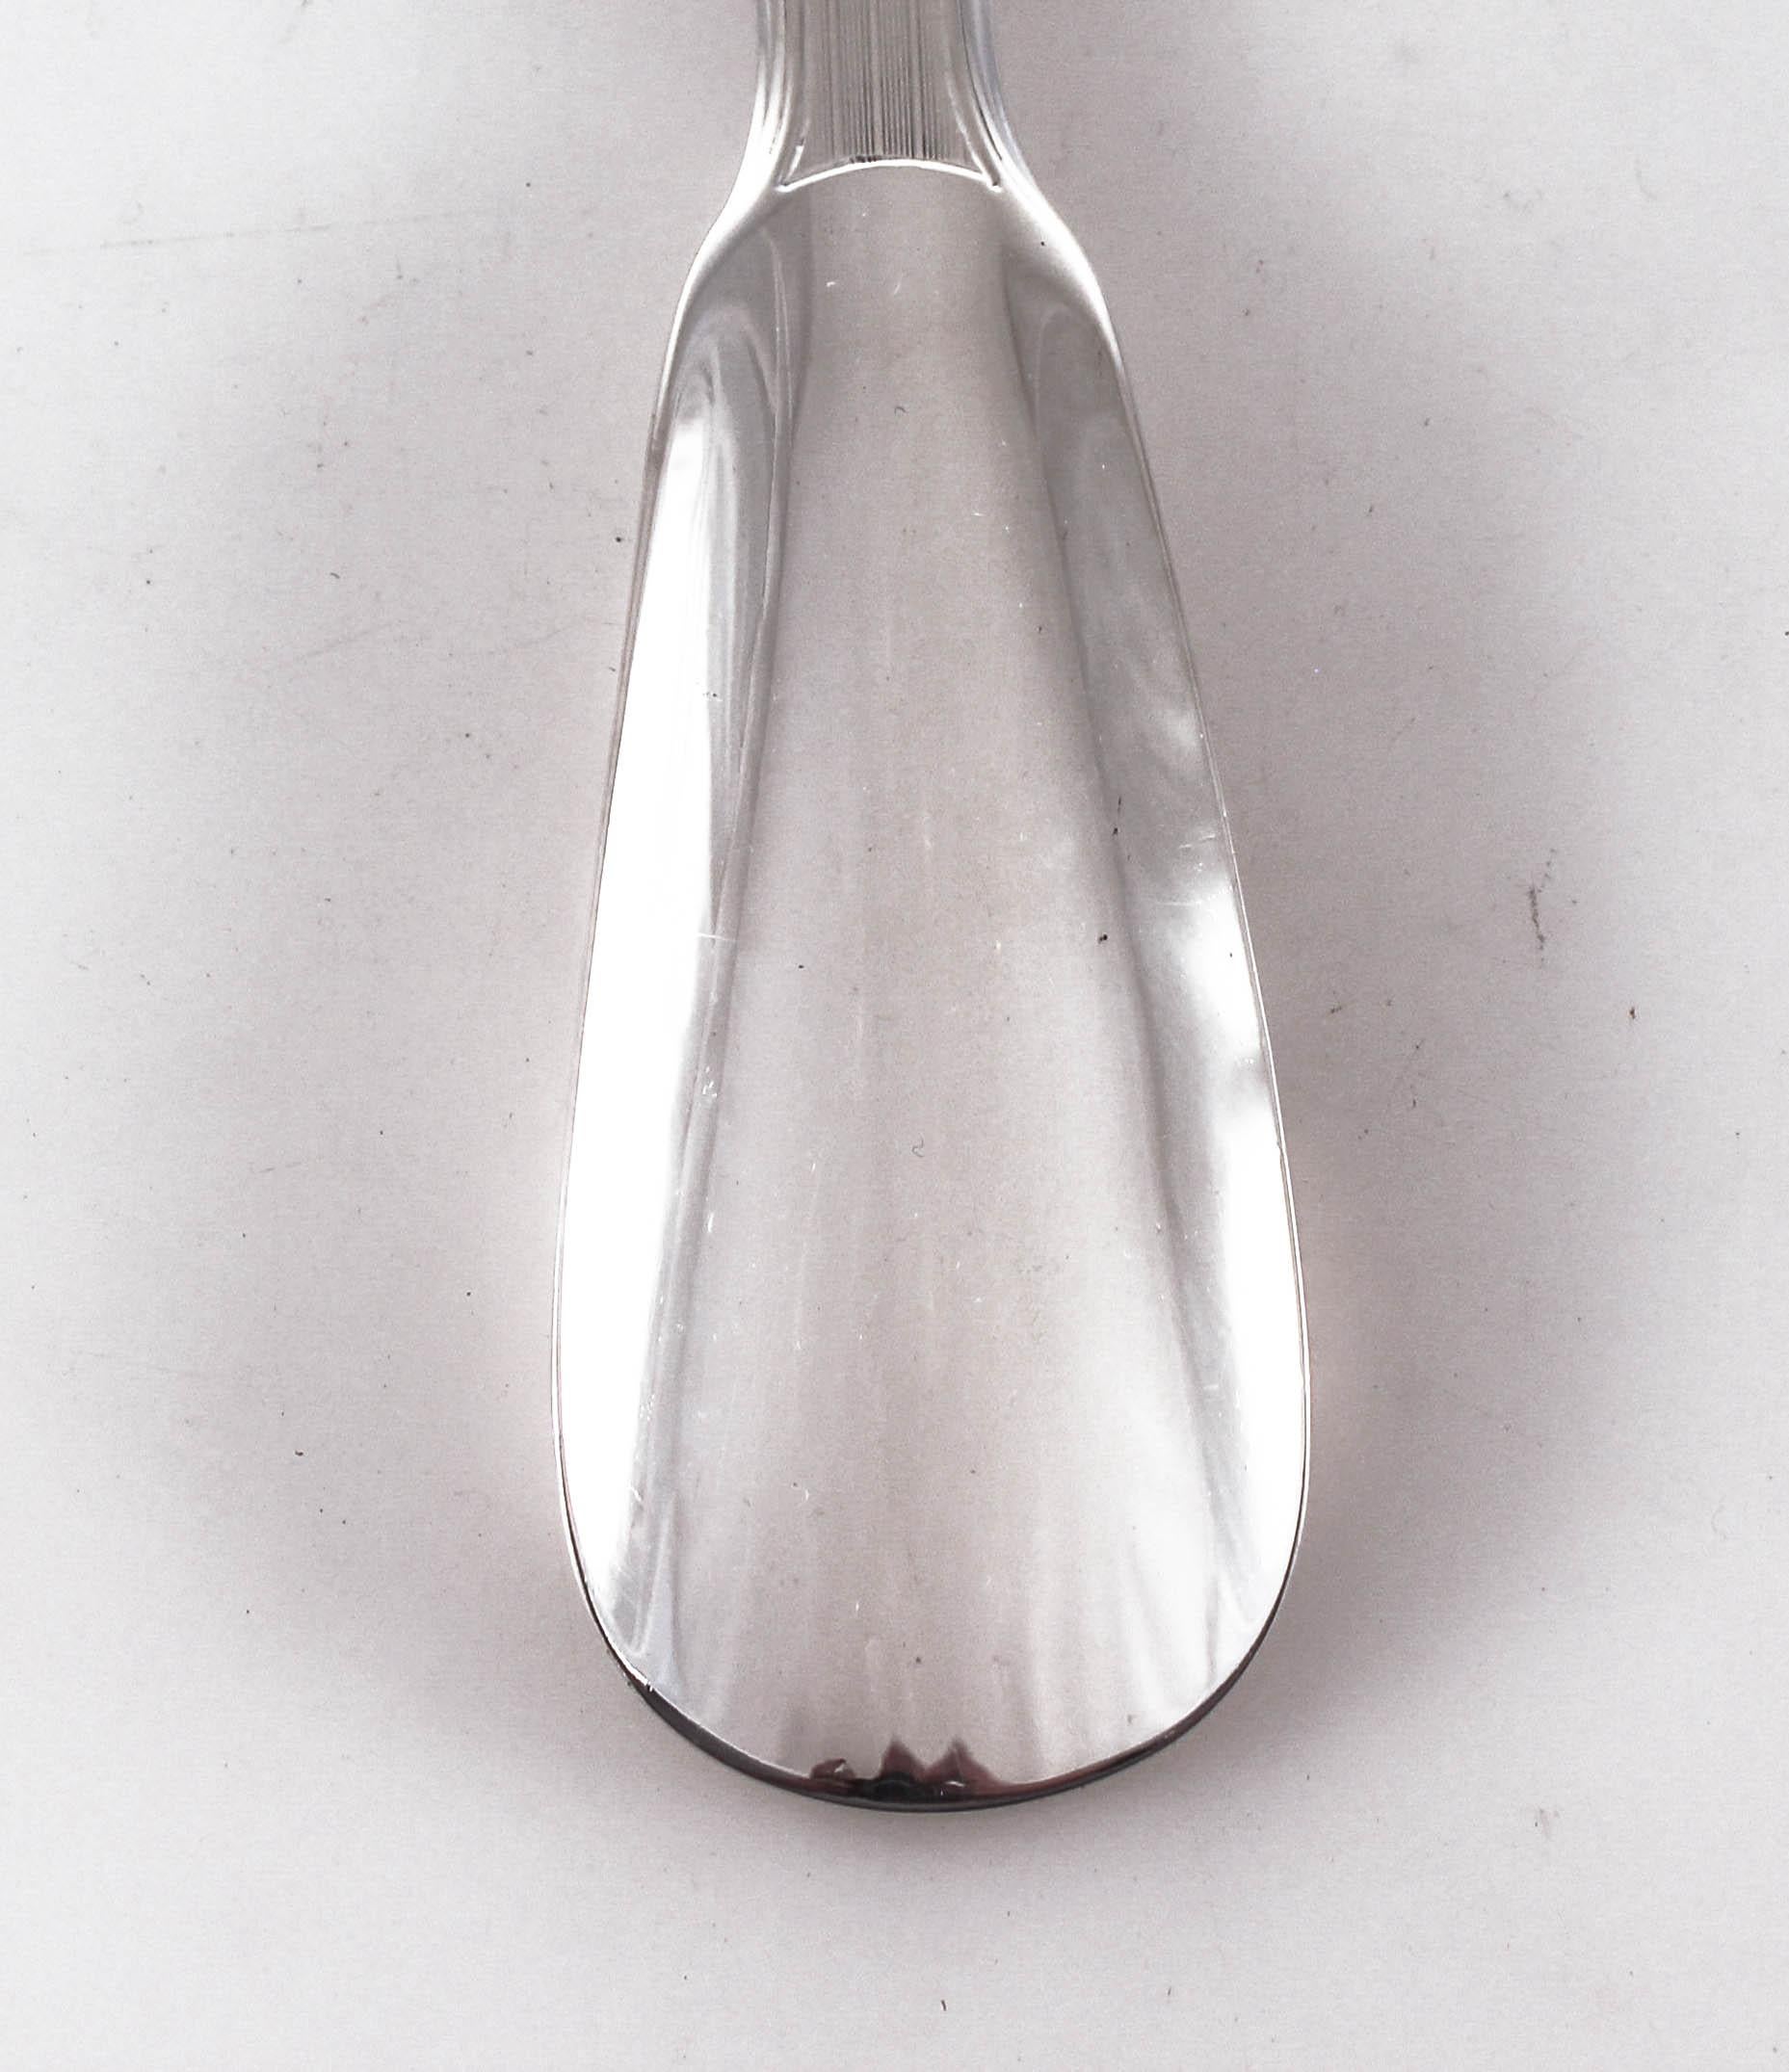 We are proud to offer this sterling silver men’s shoehorn. A very rare find, it is completely sterling silver from top to bottom. It has a pinstripe pattern on the handle giving it a handsome masculine appeal. A great Christmas, birthday,